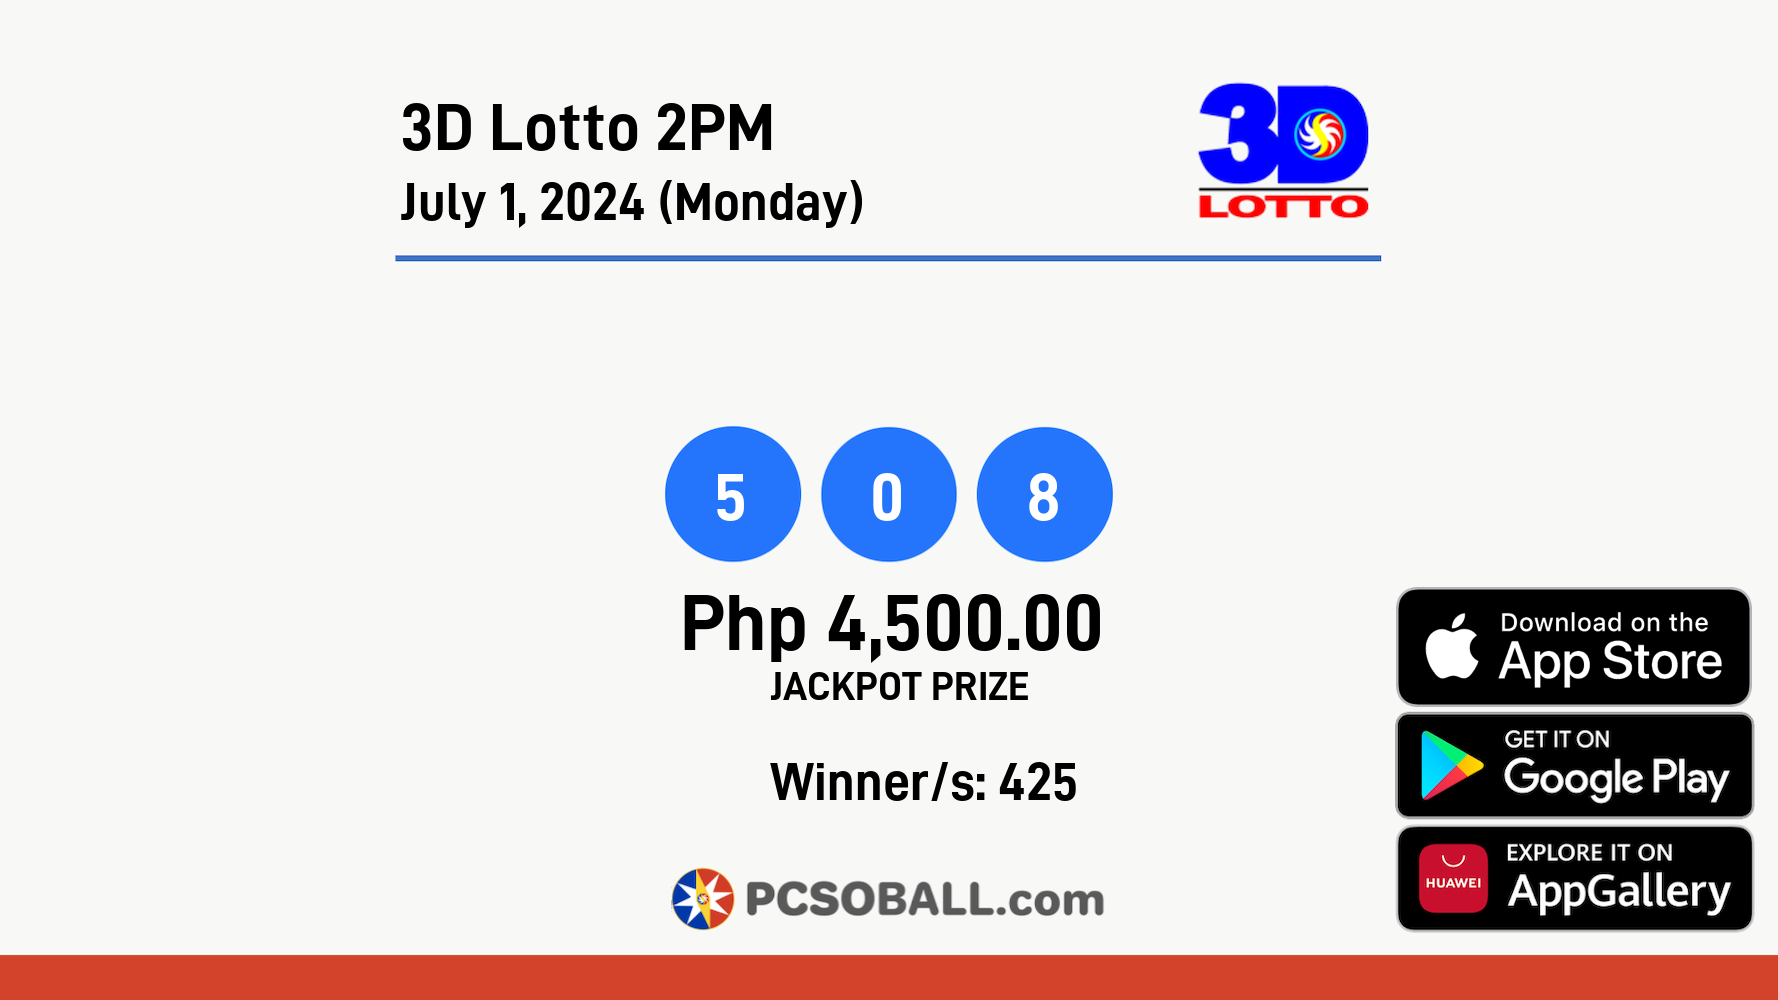 3D Lotto 2PM July 1, 2024 (Monday) Result